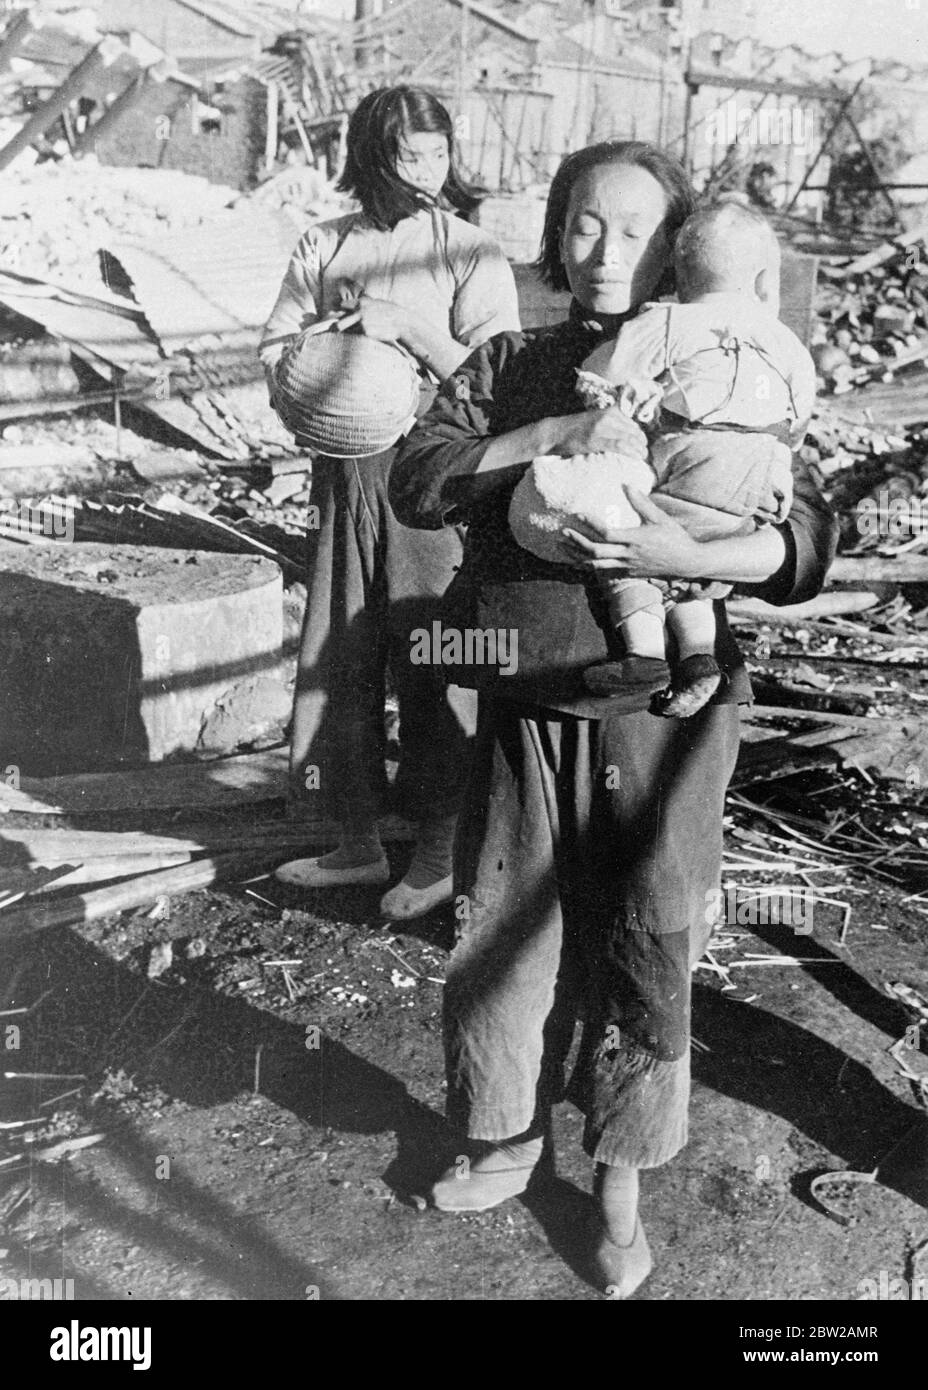 Japanese feed starving Chinese refugees in Shanghai. These pictures, just received in London, or made as hundreds of Chinese refugees from Shanghai, most of them starving and in a pitiful condition, received a ration of rise from the Japanese at Yangtzepoo, Shanghai. Large numbers of women and children were among those who flocked with baskets around the Japanese soldiers, who, on this occasion, represented the only hope of keeping alive. Photo shows, a mother, nursing a tiny baby, holds a bundle containing a ration of rice at Yangztzepoo. 2 November 1937 Stock Photo